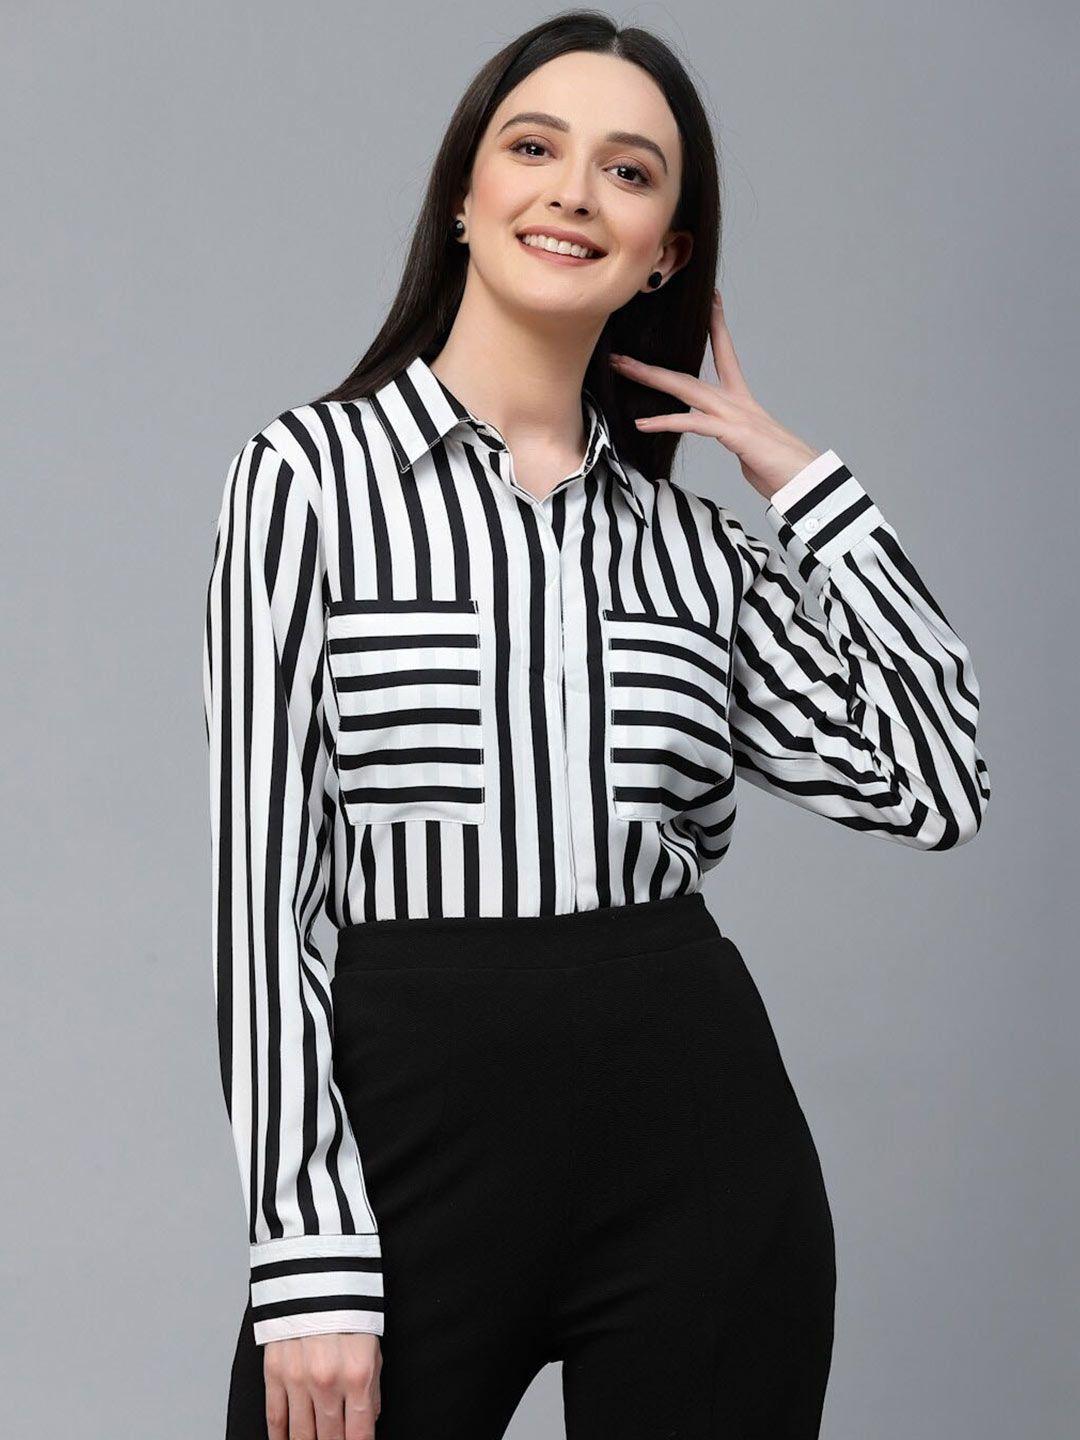 style-quotient-smart-striped-semi-formal-shirt